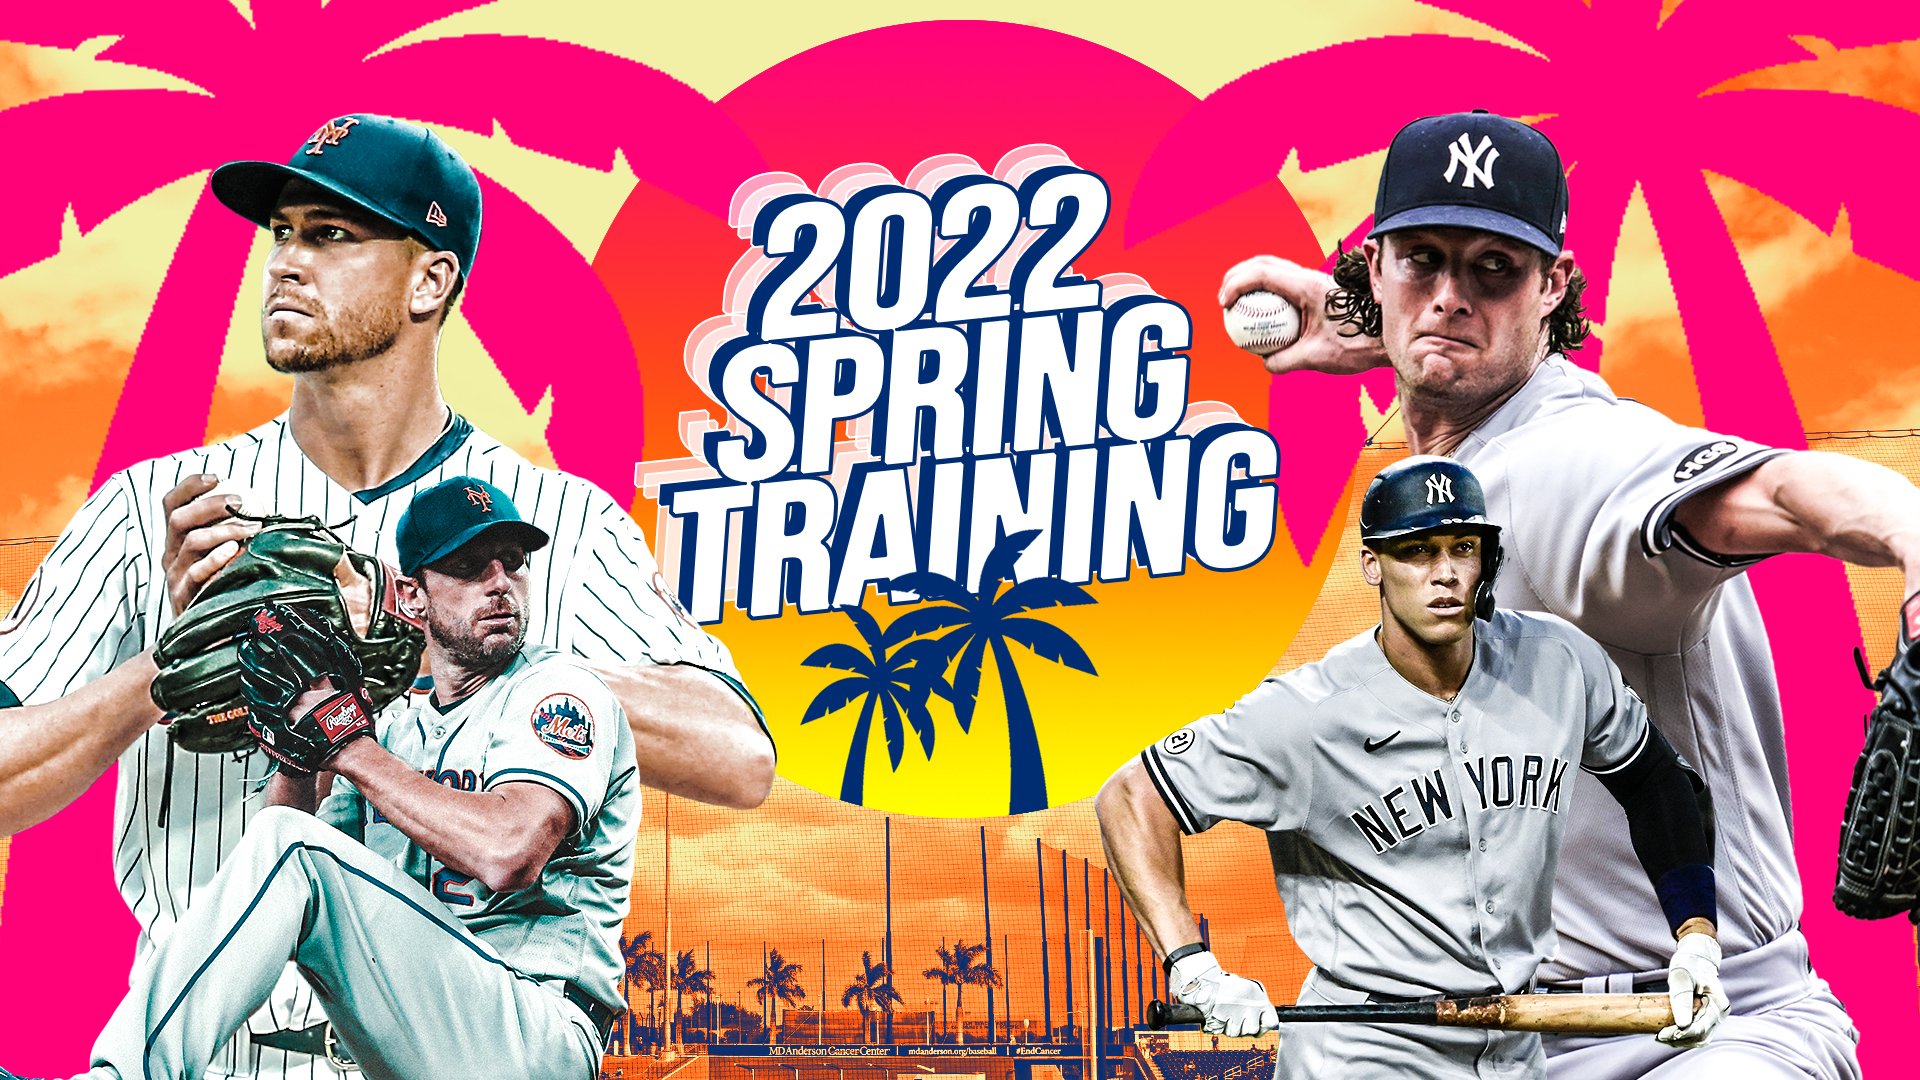 020322-SPRING TRAINING 2022-EVENTS PAGES-V2.jpg